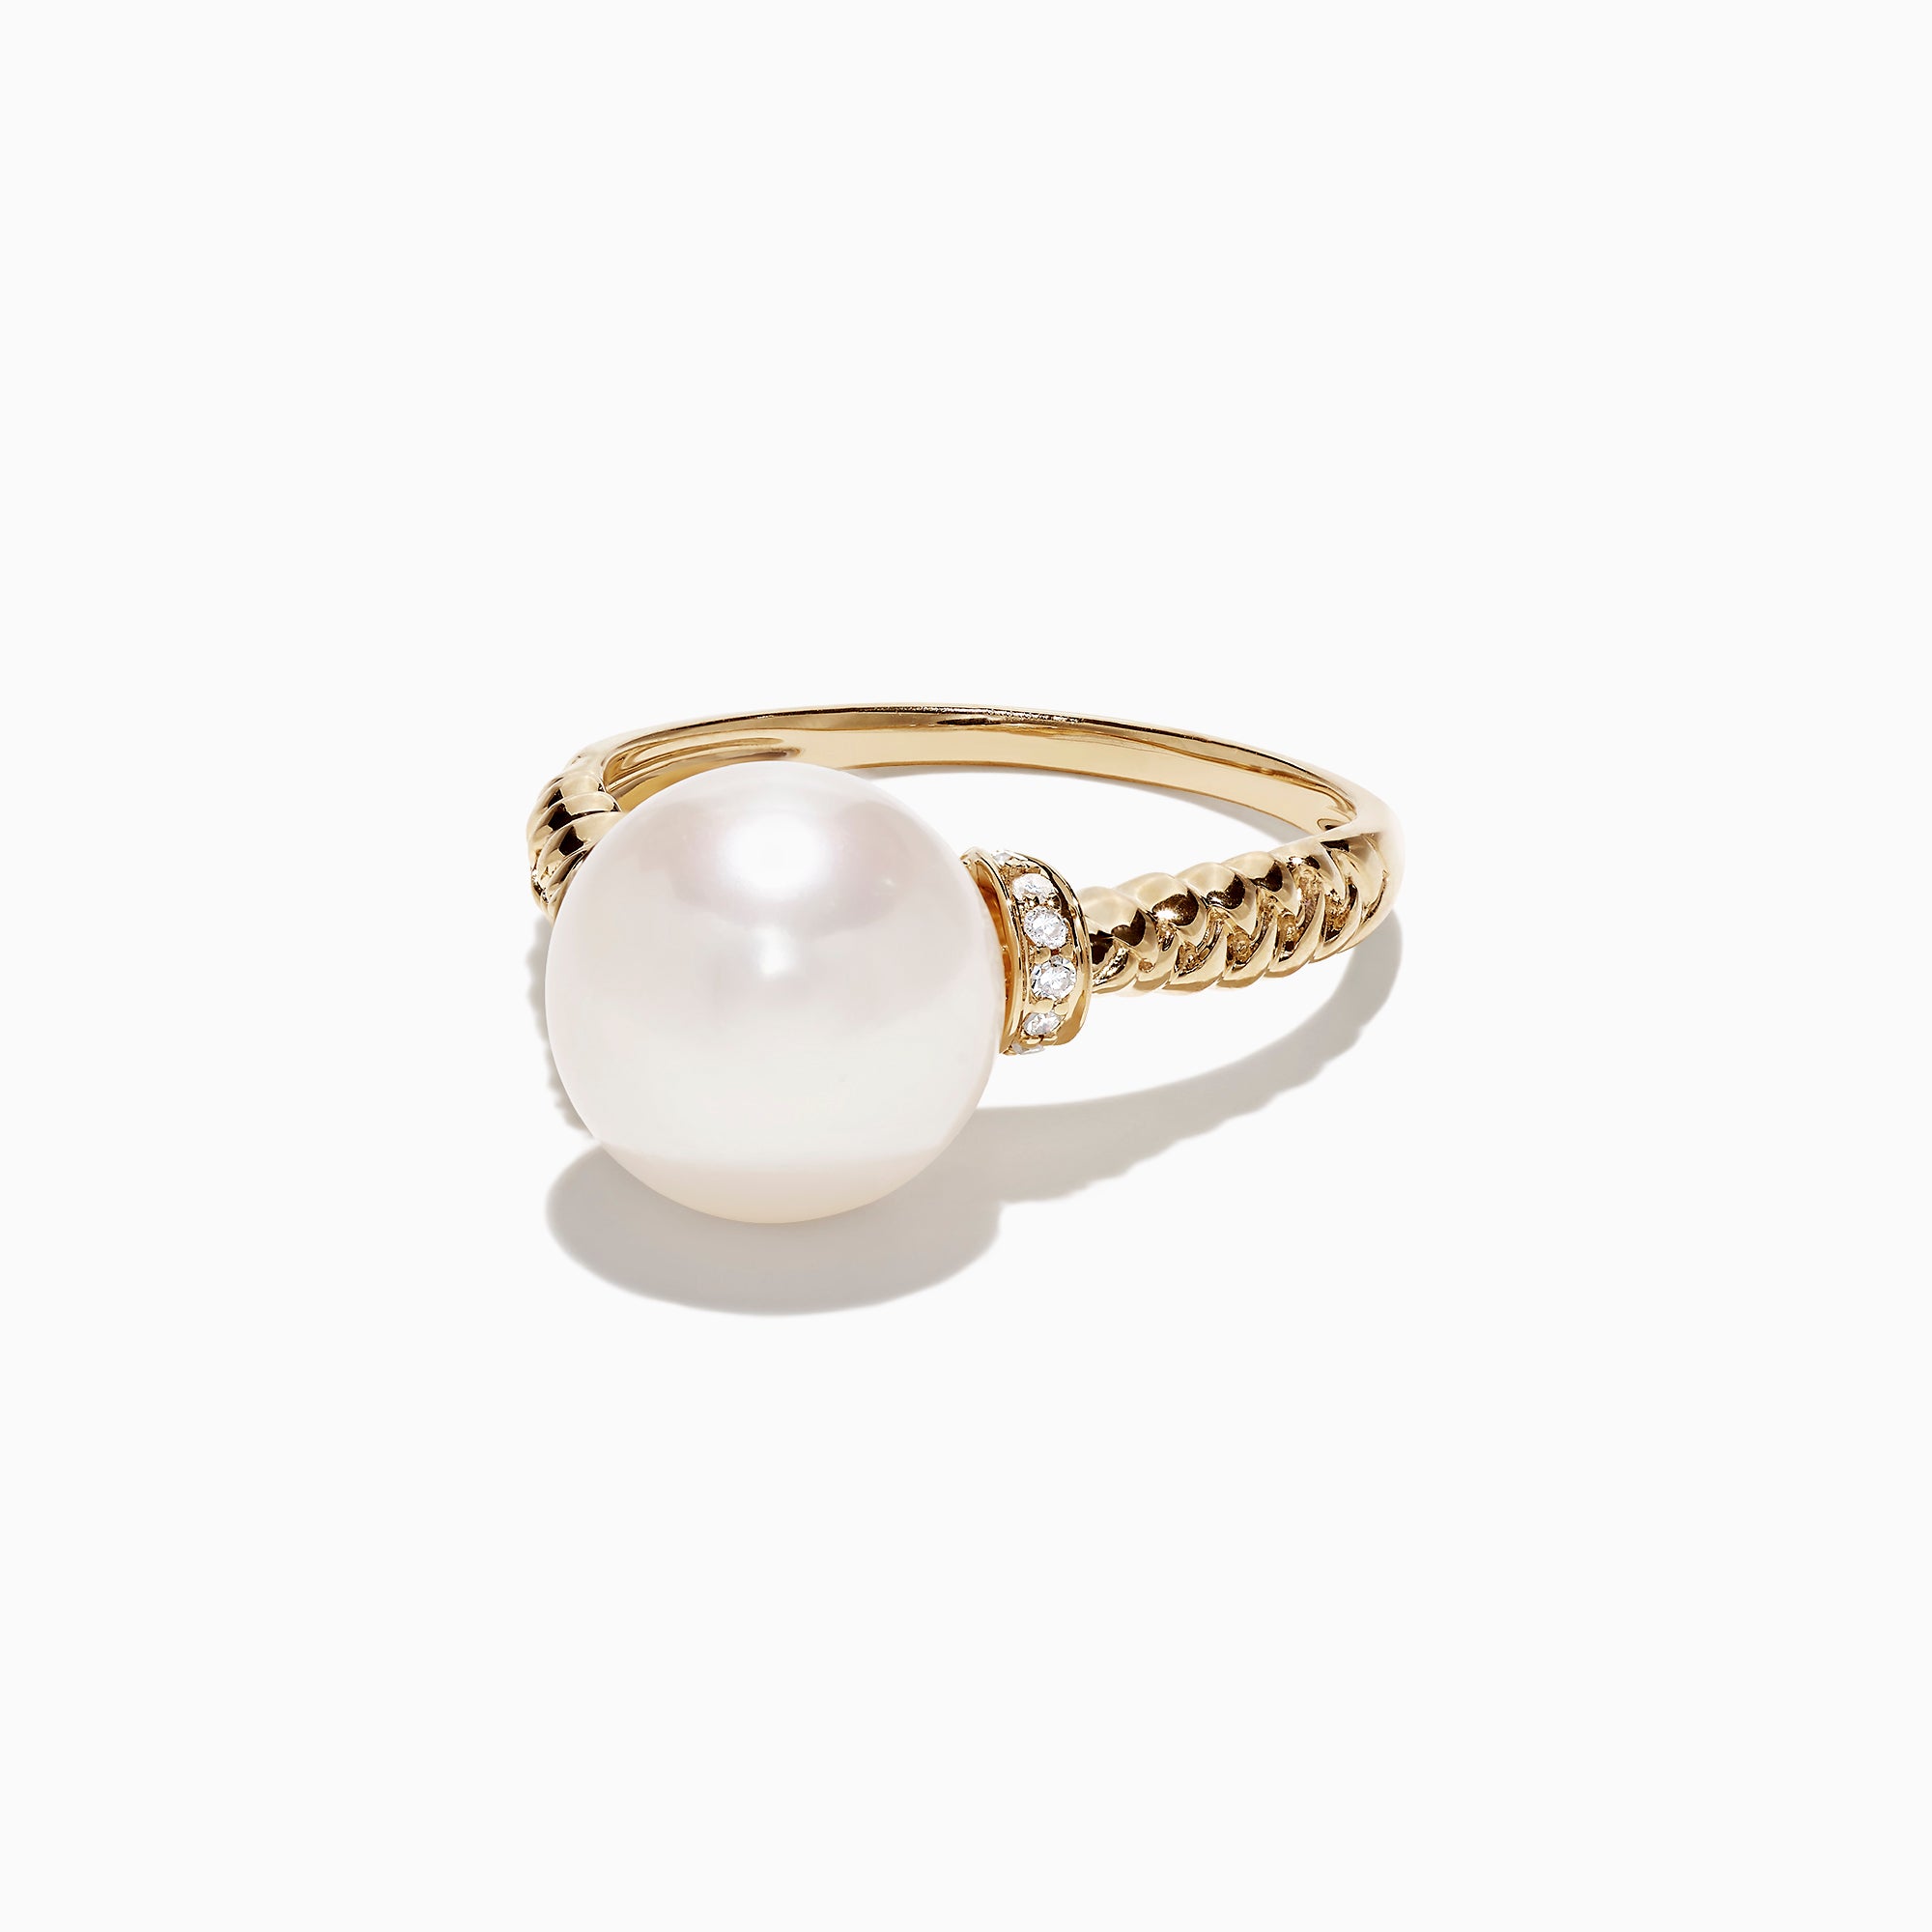 Effy 14K Yellow Gold Cultured Fresh Water Pearl and Diamond Ring, 0.06 TCW